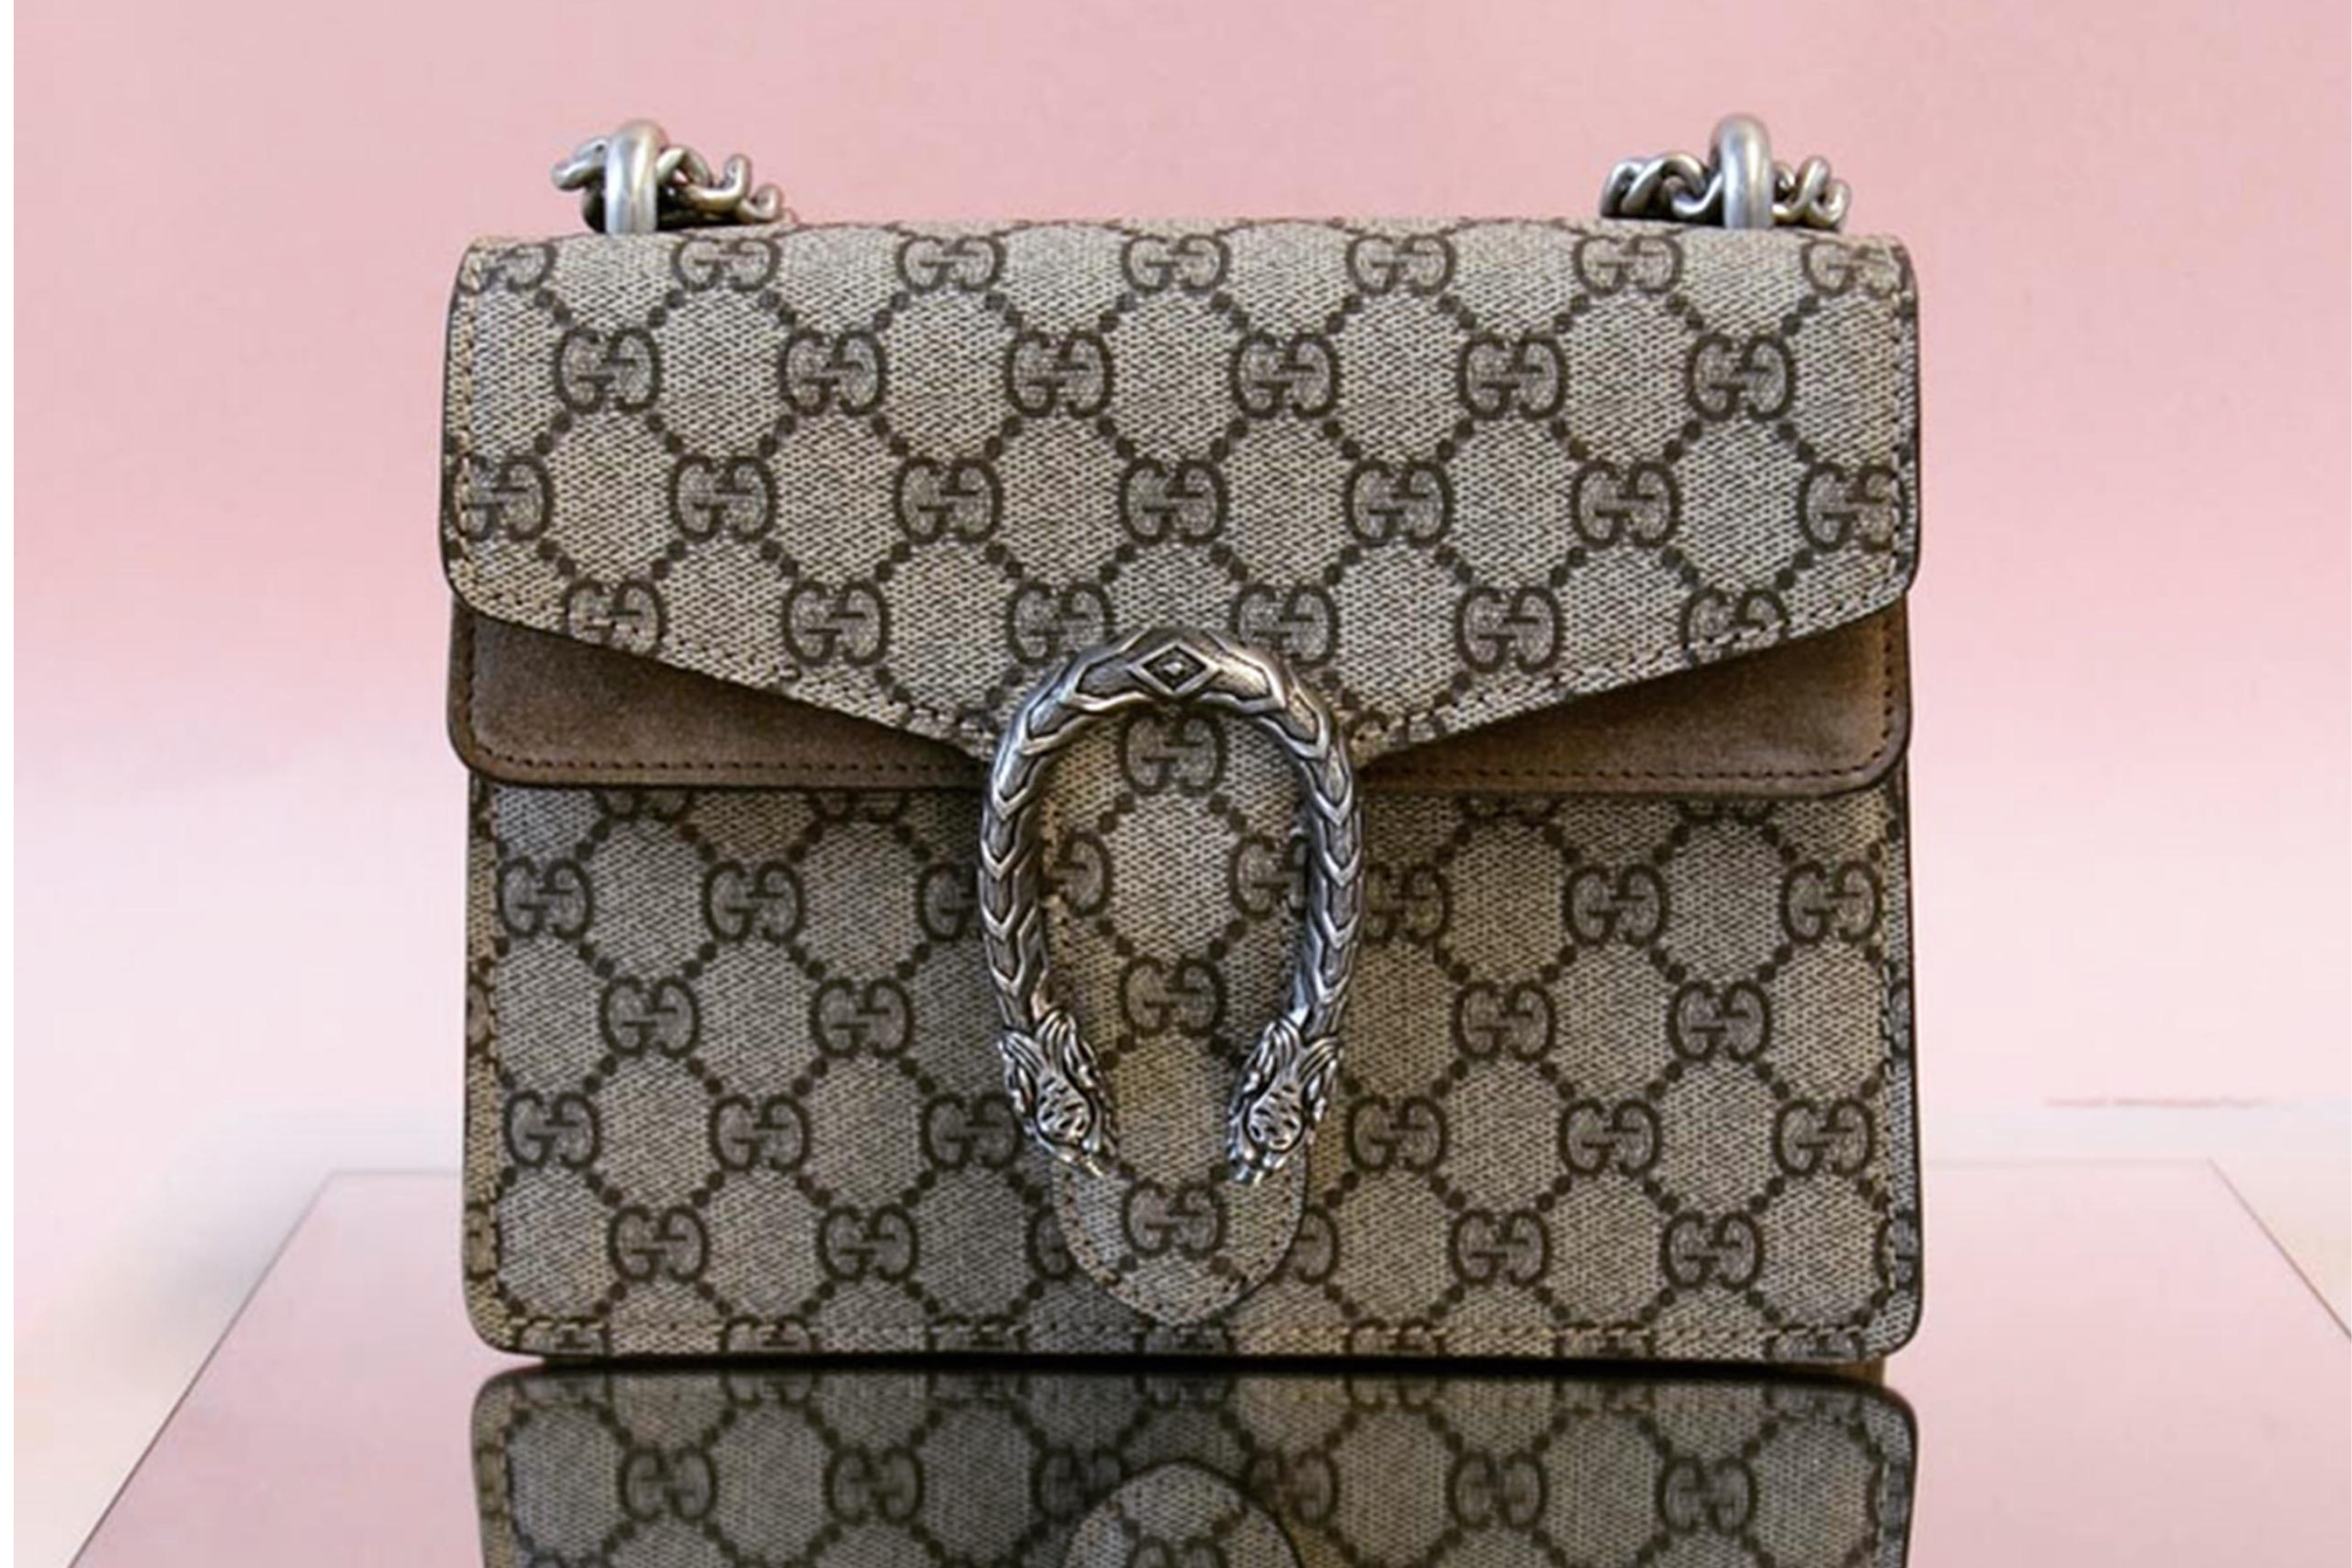 How To Authenticate A Gucci Bag In 5 Steps